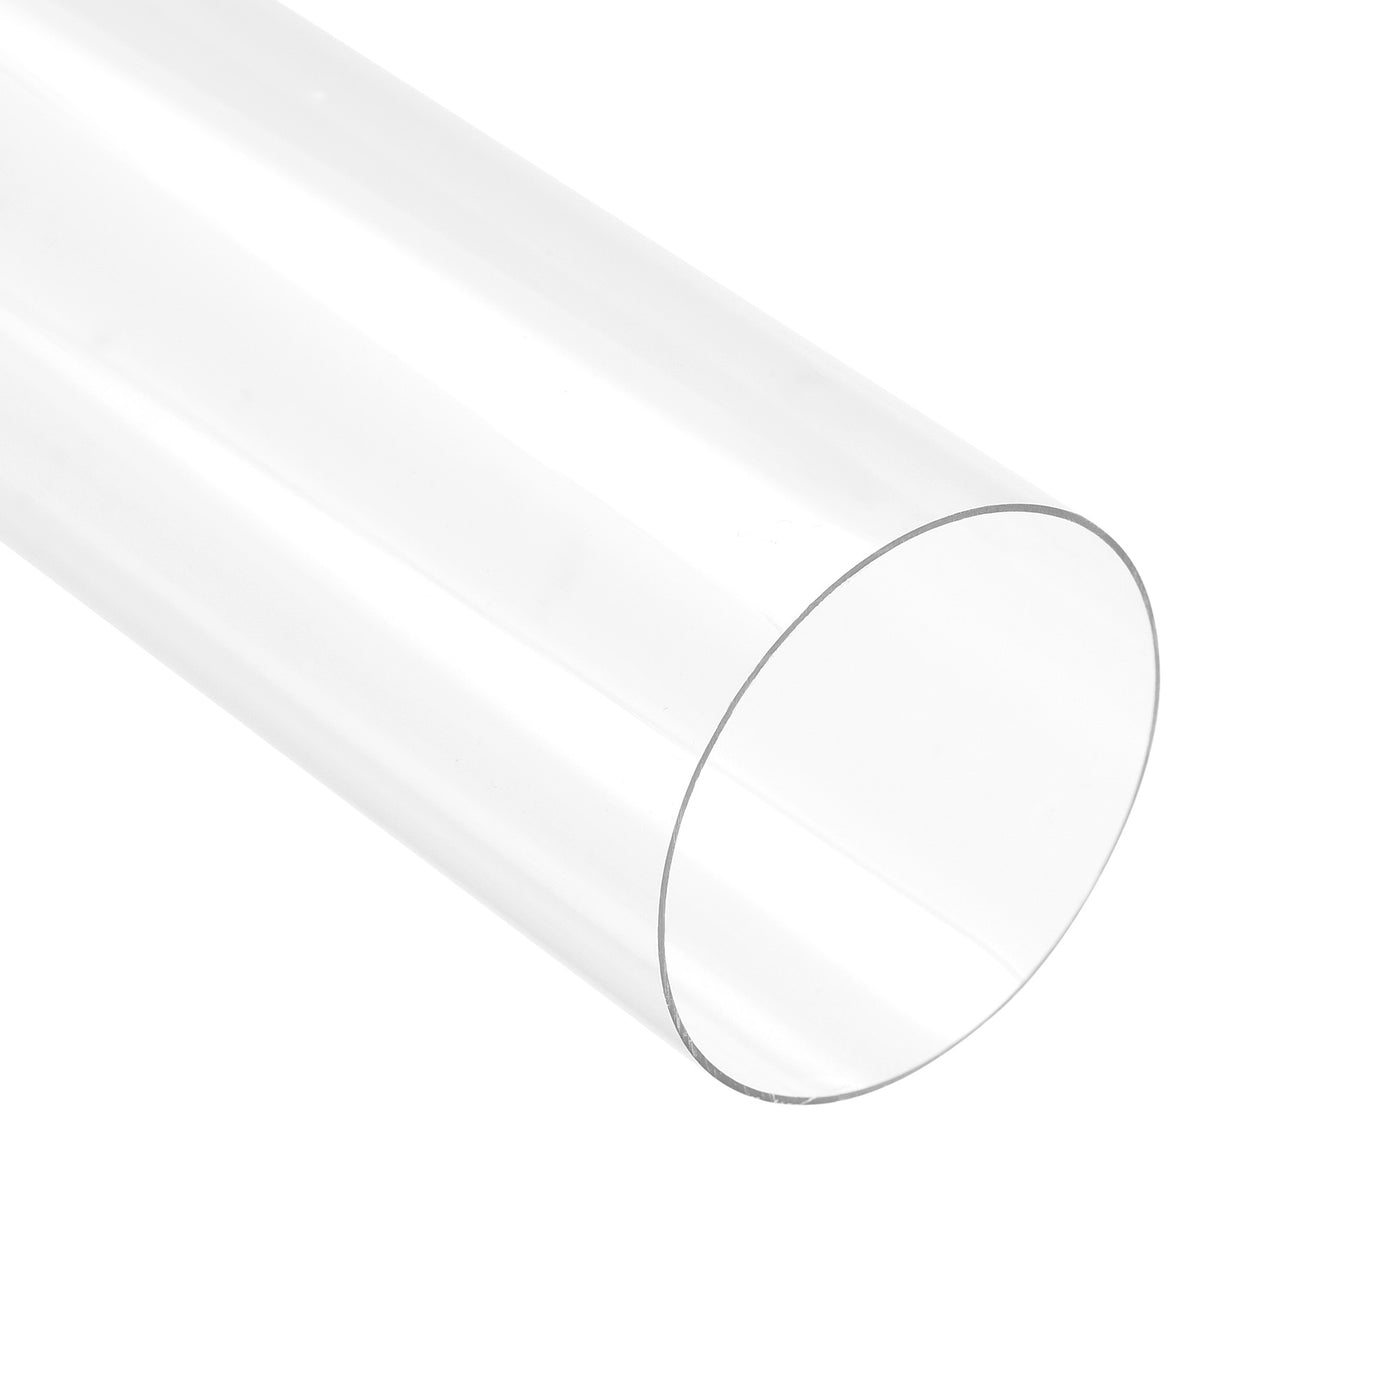 uxcell Uxcell 2pcs Polycarbonate Rigid Round Clear Tubing 41.6mm(1.63 Inch)IDx43mm(1.7 Inch)ODx250mm(9.84 Inch) Length Plastic Storage Transparent Tube with Lids